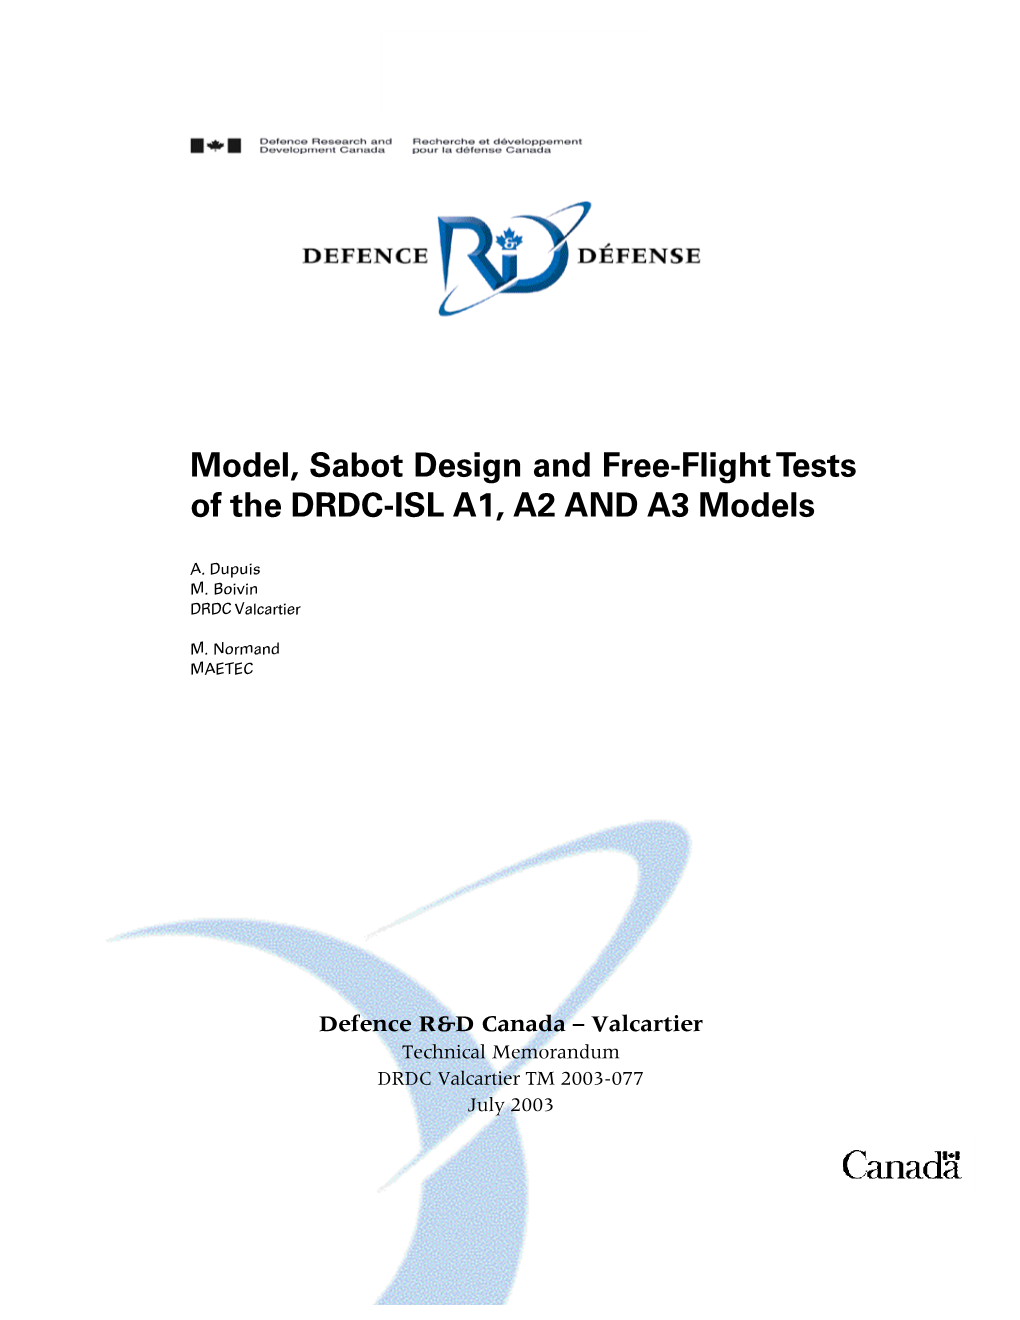 Model, Sabot Design and Free-Flight Tests of the DRDC-ISL A1, A2 and A3 Models